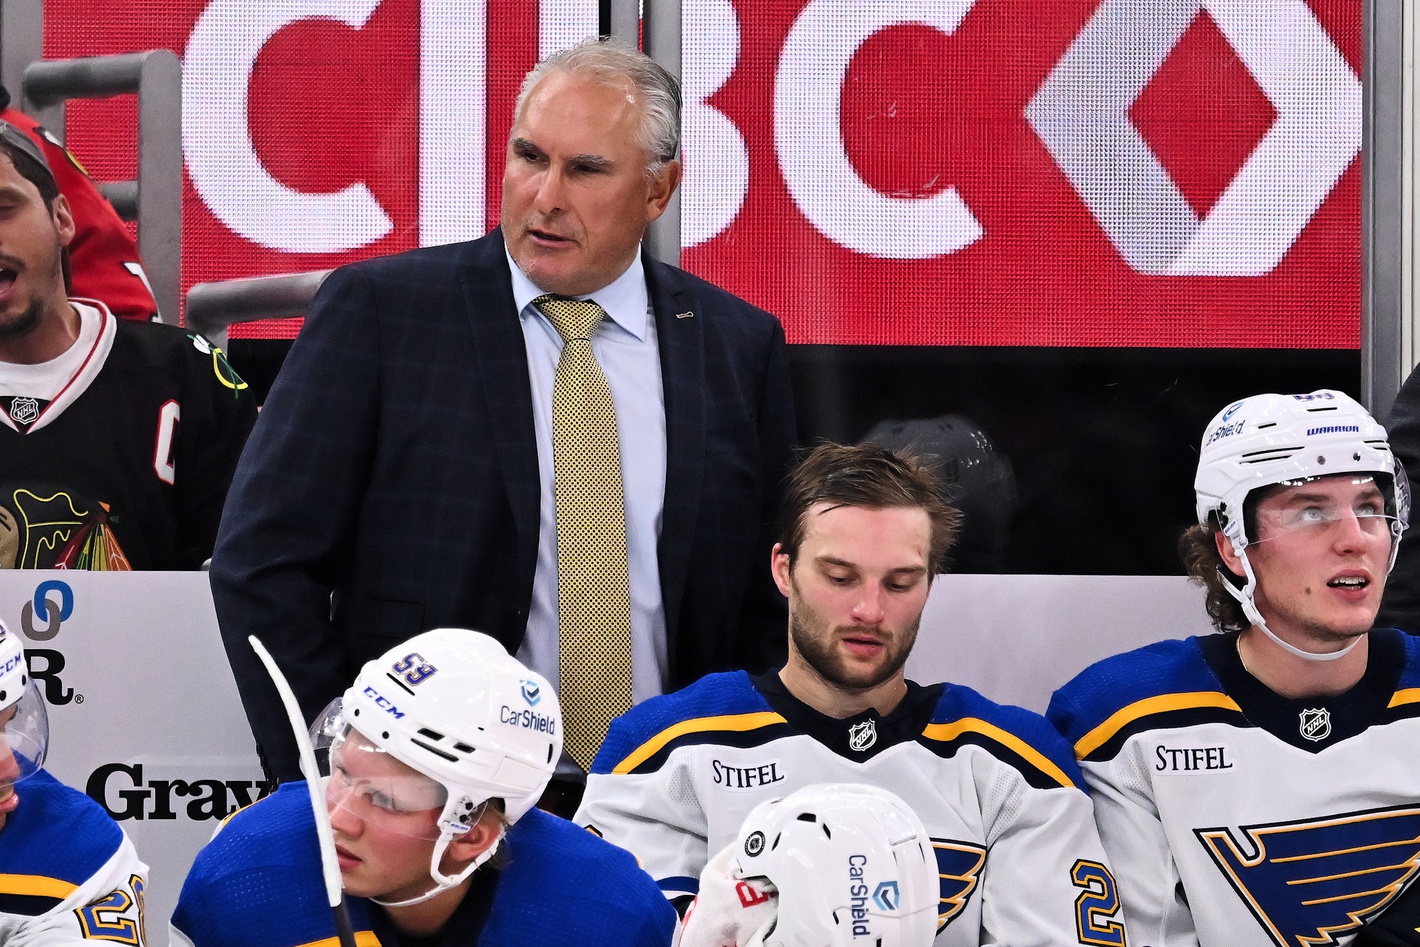 St. Louis Blues Doug Armstrong Leaving All Doors Open But One